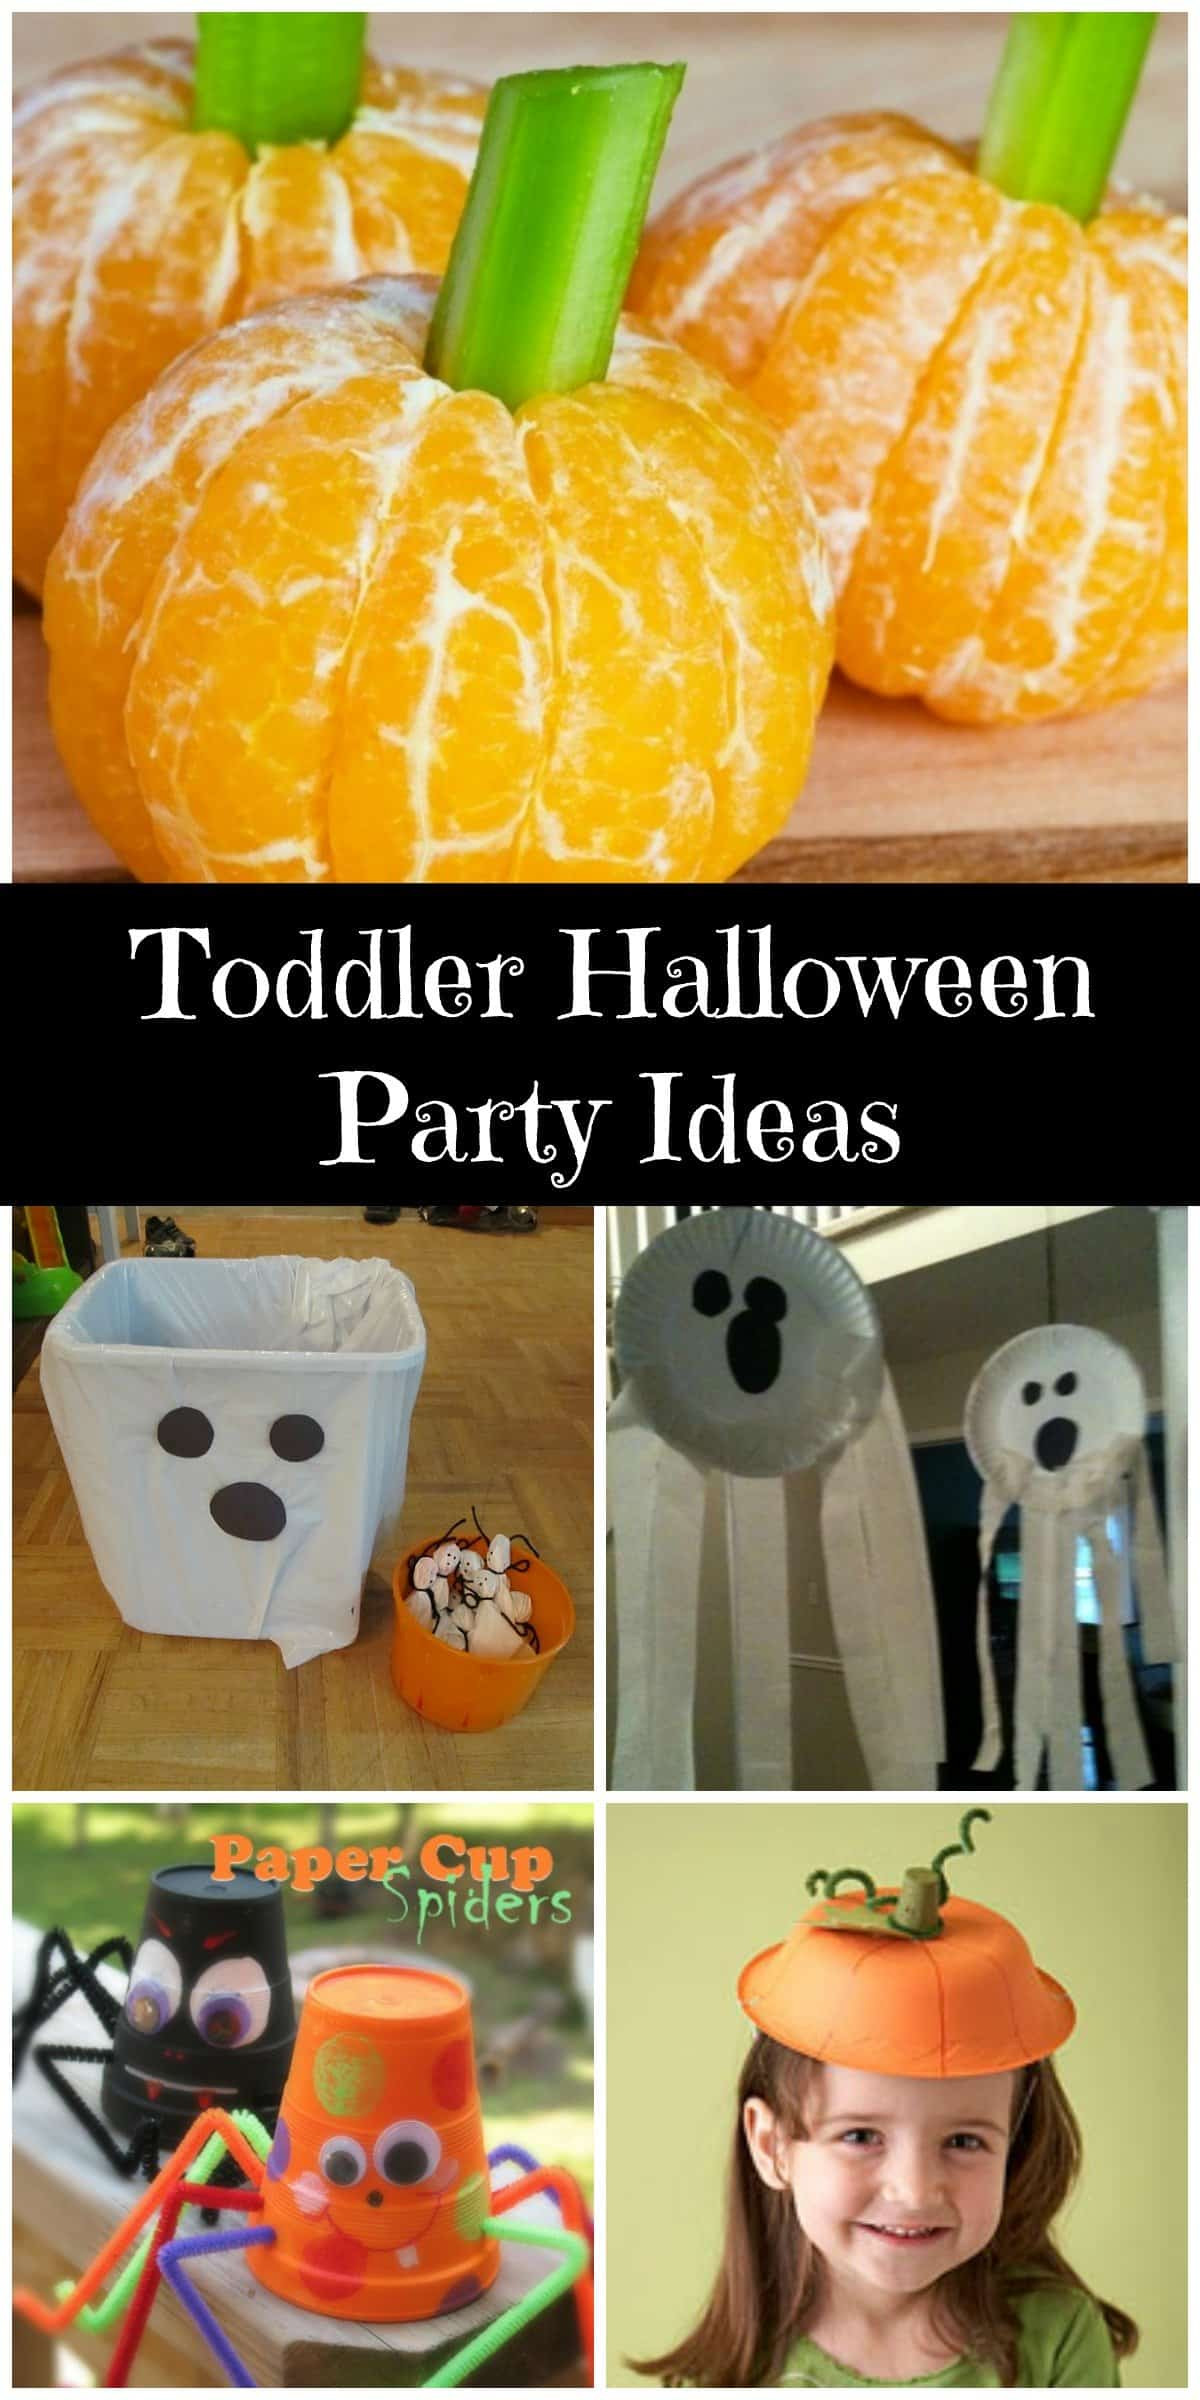 Kid Halloween Party Ideas Toddlers
 Toddler Halloween Party Creative Ramblings